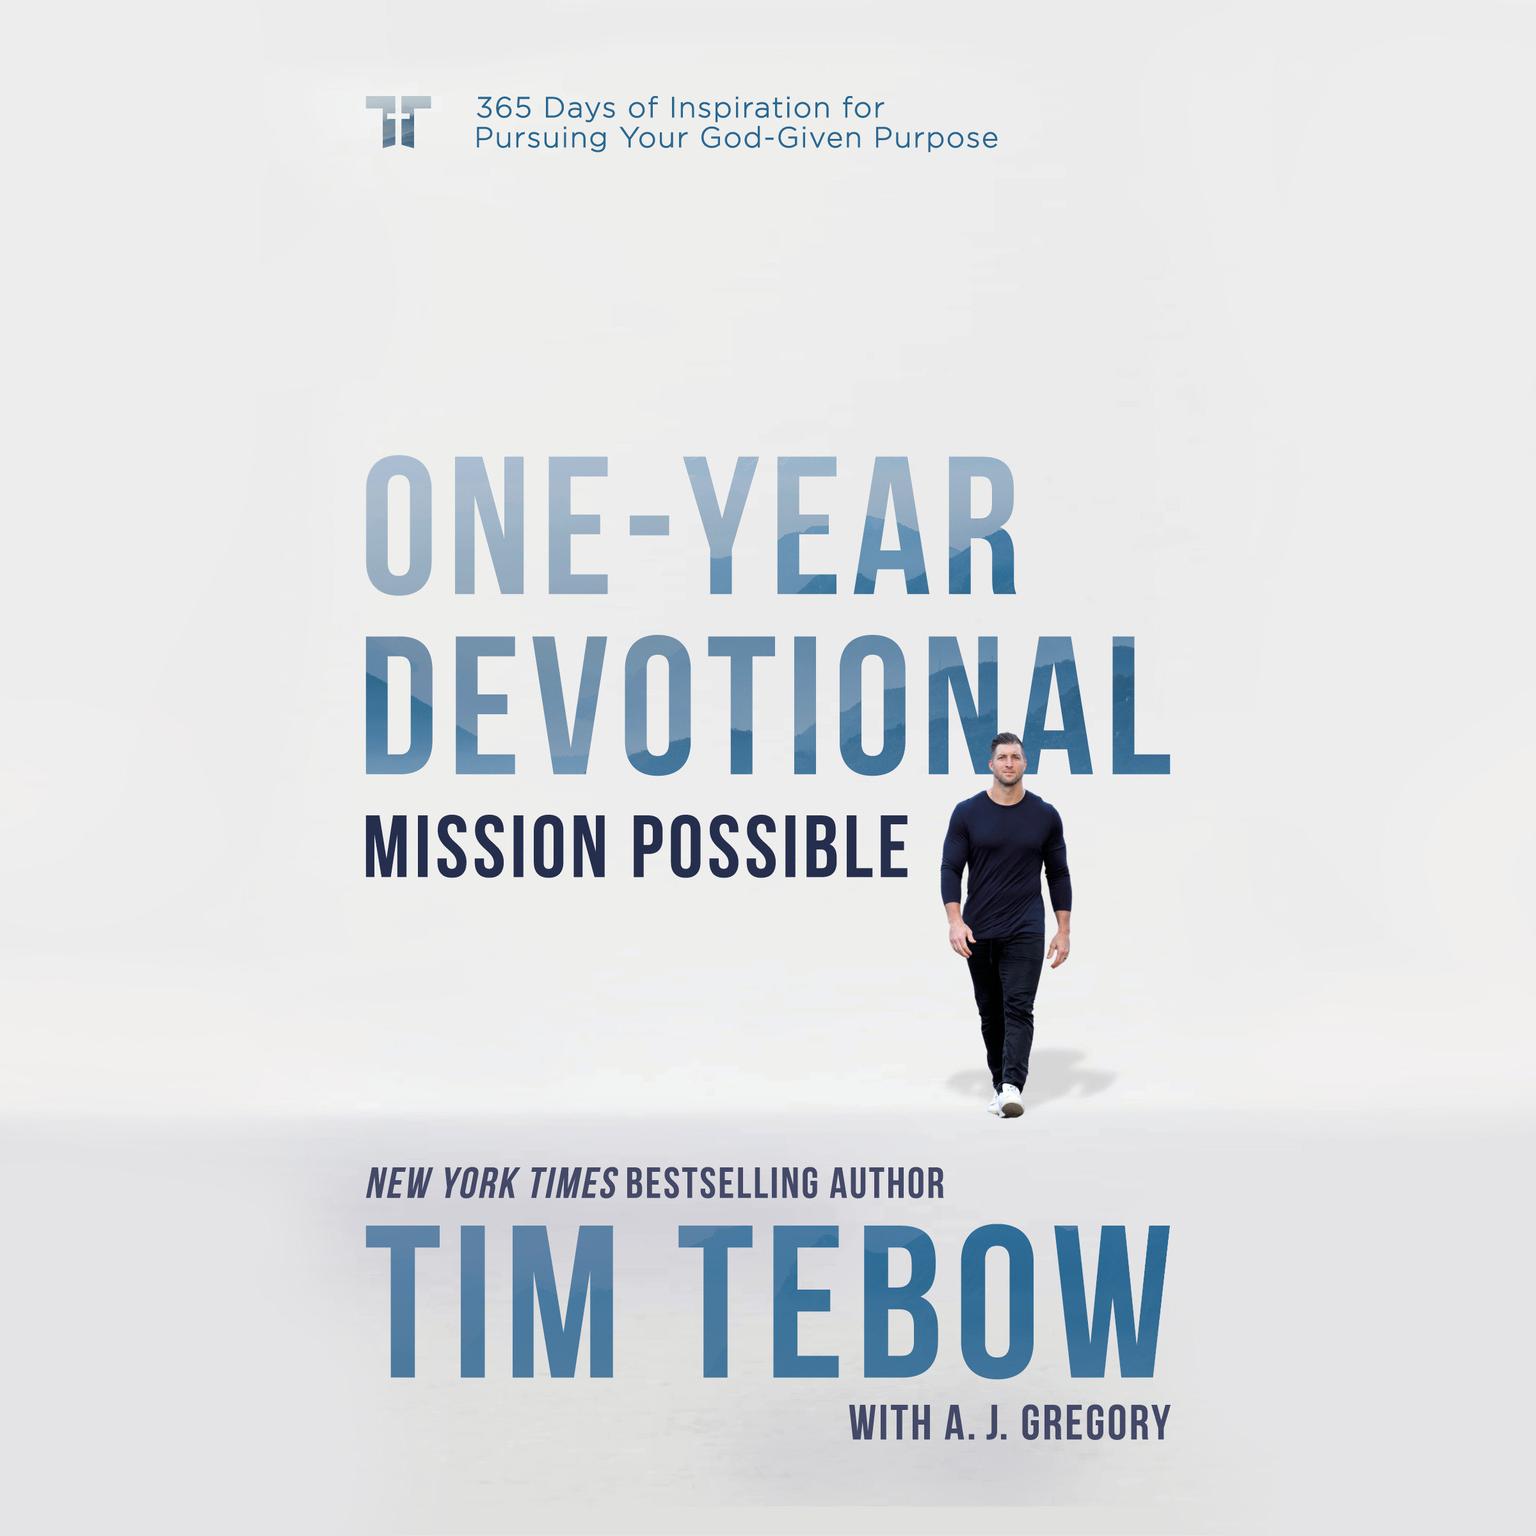 Mission Possible One-Year Devotional: 365 Days of Inspiration for Pursuing Your God-Given Purpose Audiobook, by Tim Tebow